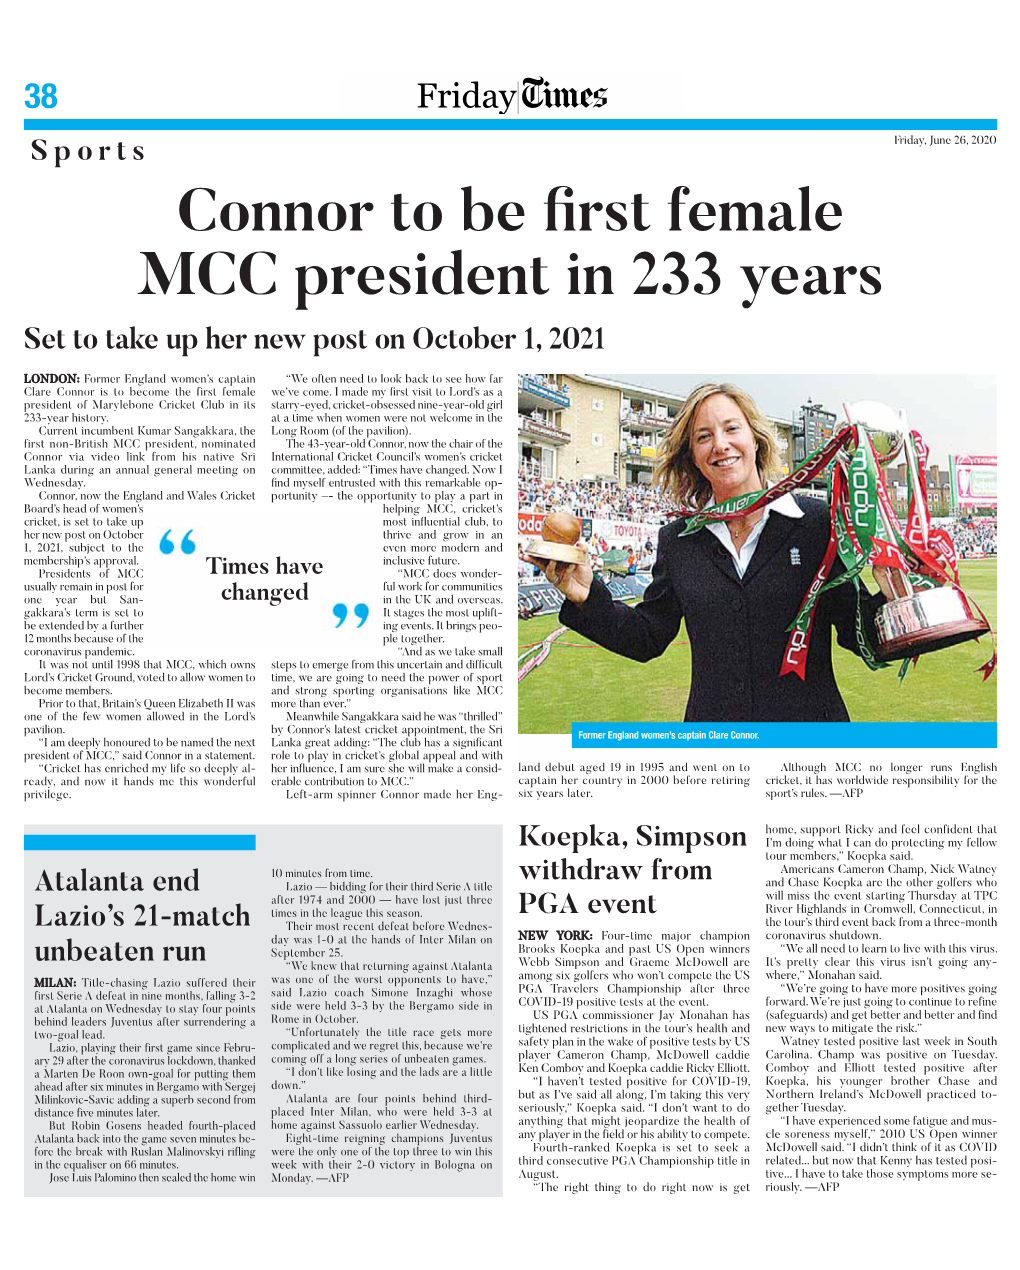 Connor to Be First Female MCC President in 233 Years Set to Take up Her New Post on October 1, 2021